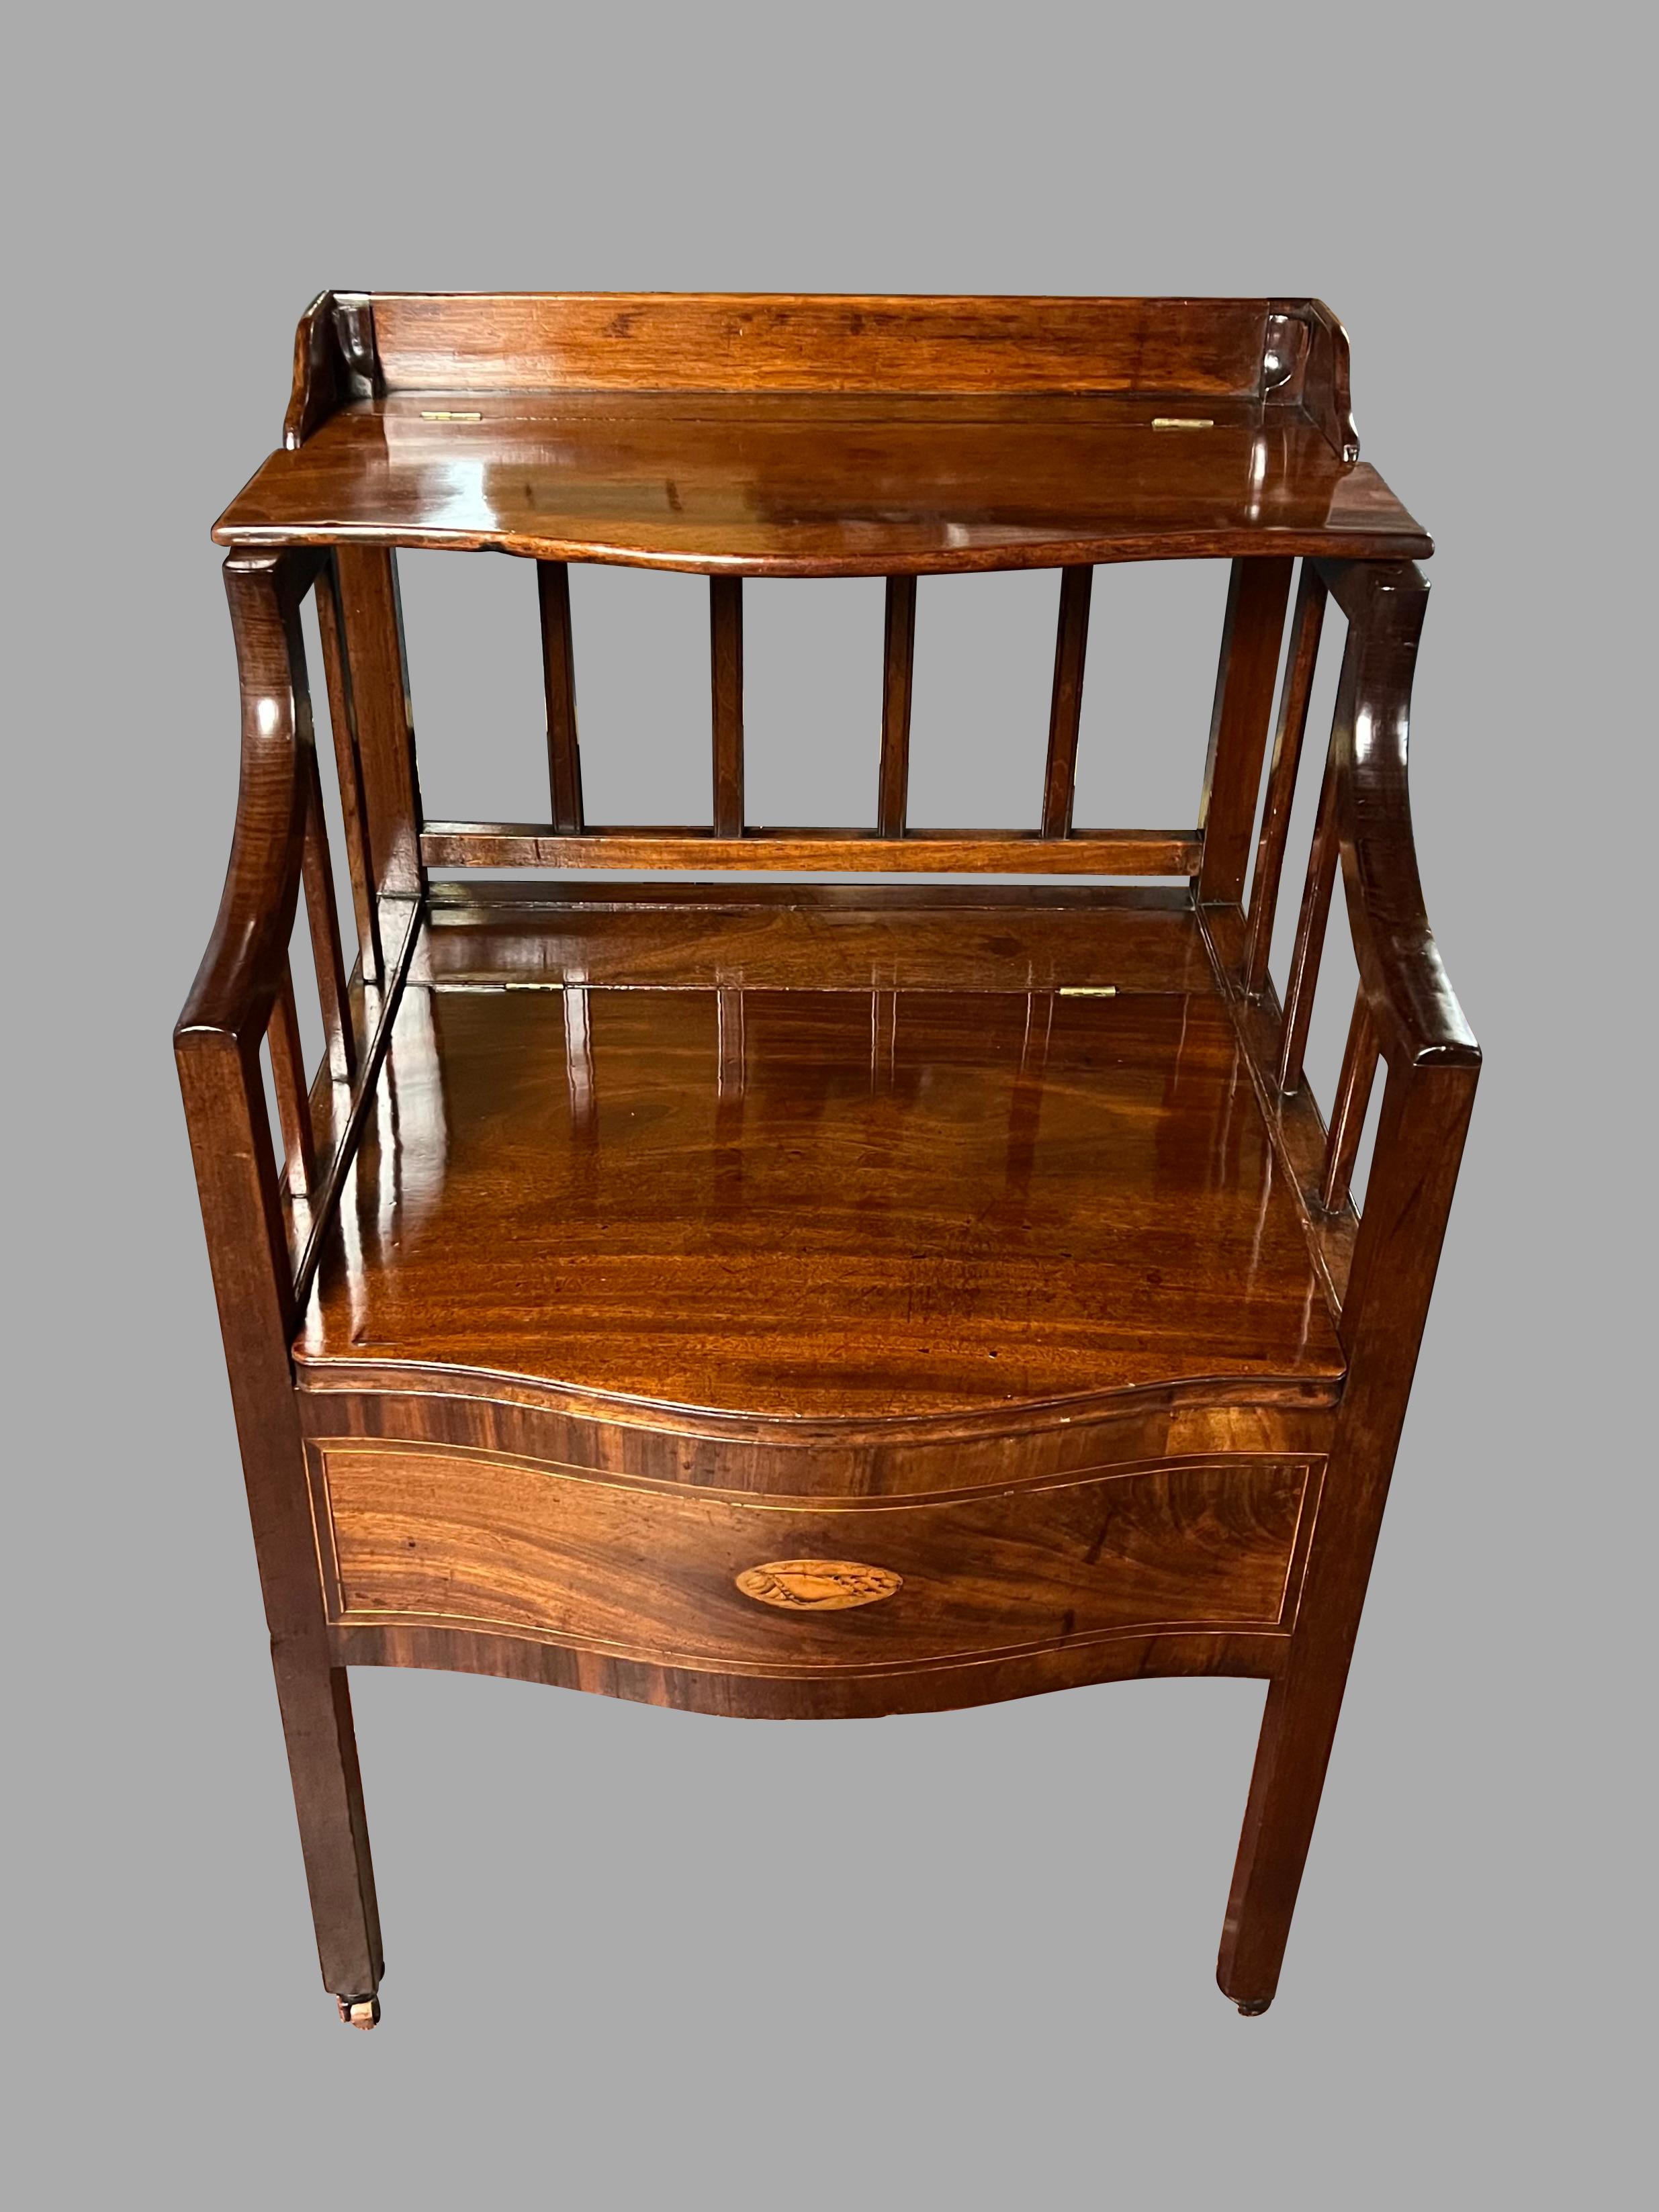 An English inlaid mahogany bedside commode of serpentine form, the front panel embellished with a well-executed satinwood inlaid conch shell. The sides and back consist of spindles and the piece rests on square legs ending in wooden casters. The